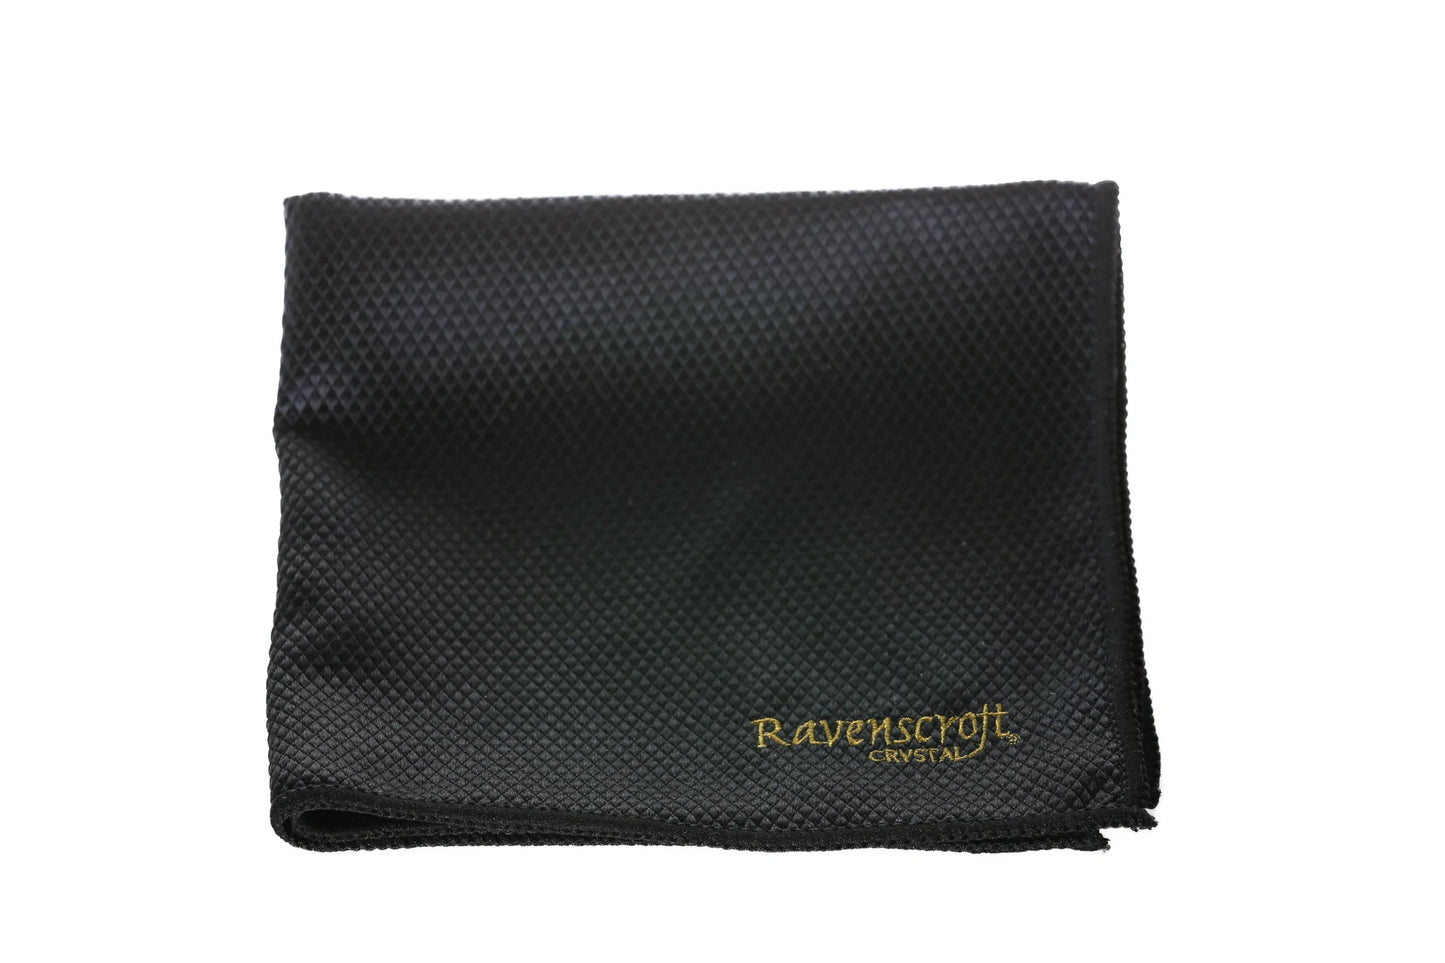 Ravenscroft Distiller Grappa Glass (Set of 4) with Free Microfiber Cleaning Cloth W6468